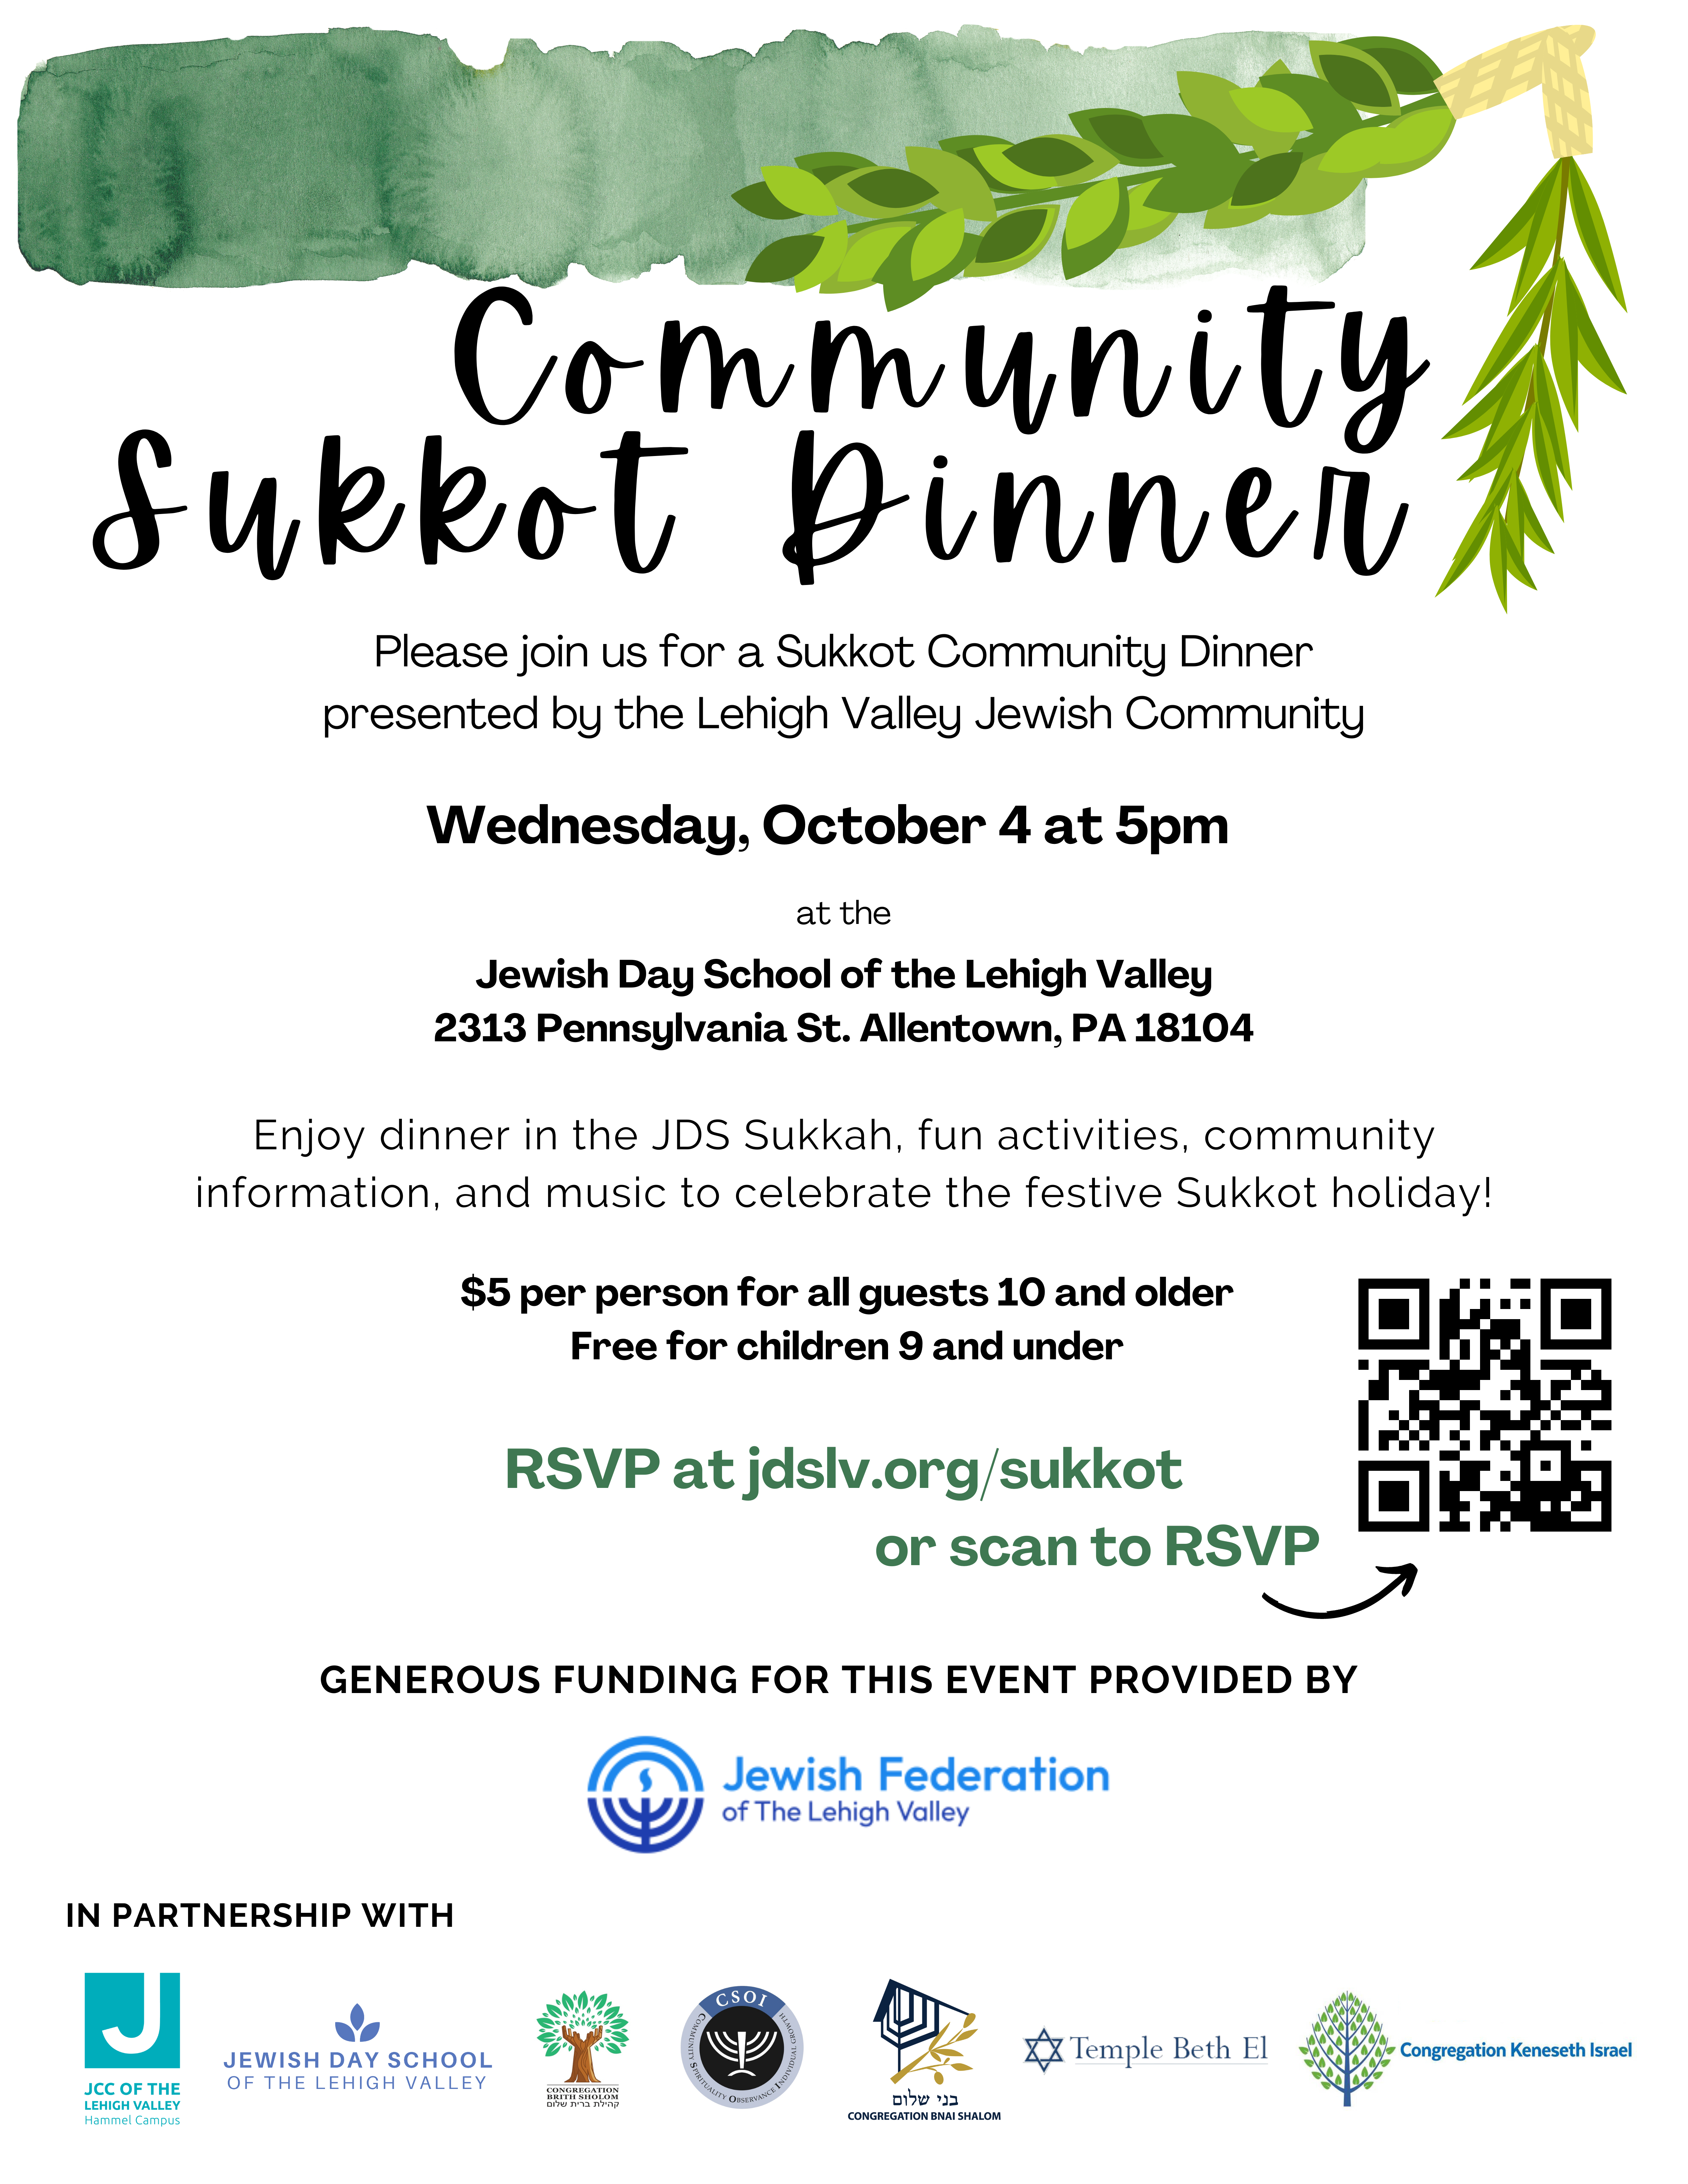 Jewish Day School invitation to celebrate Sukkot on Oct 4th at 5 P.M. image of event flyer.